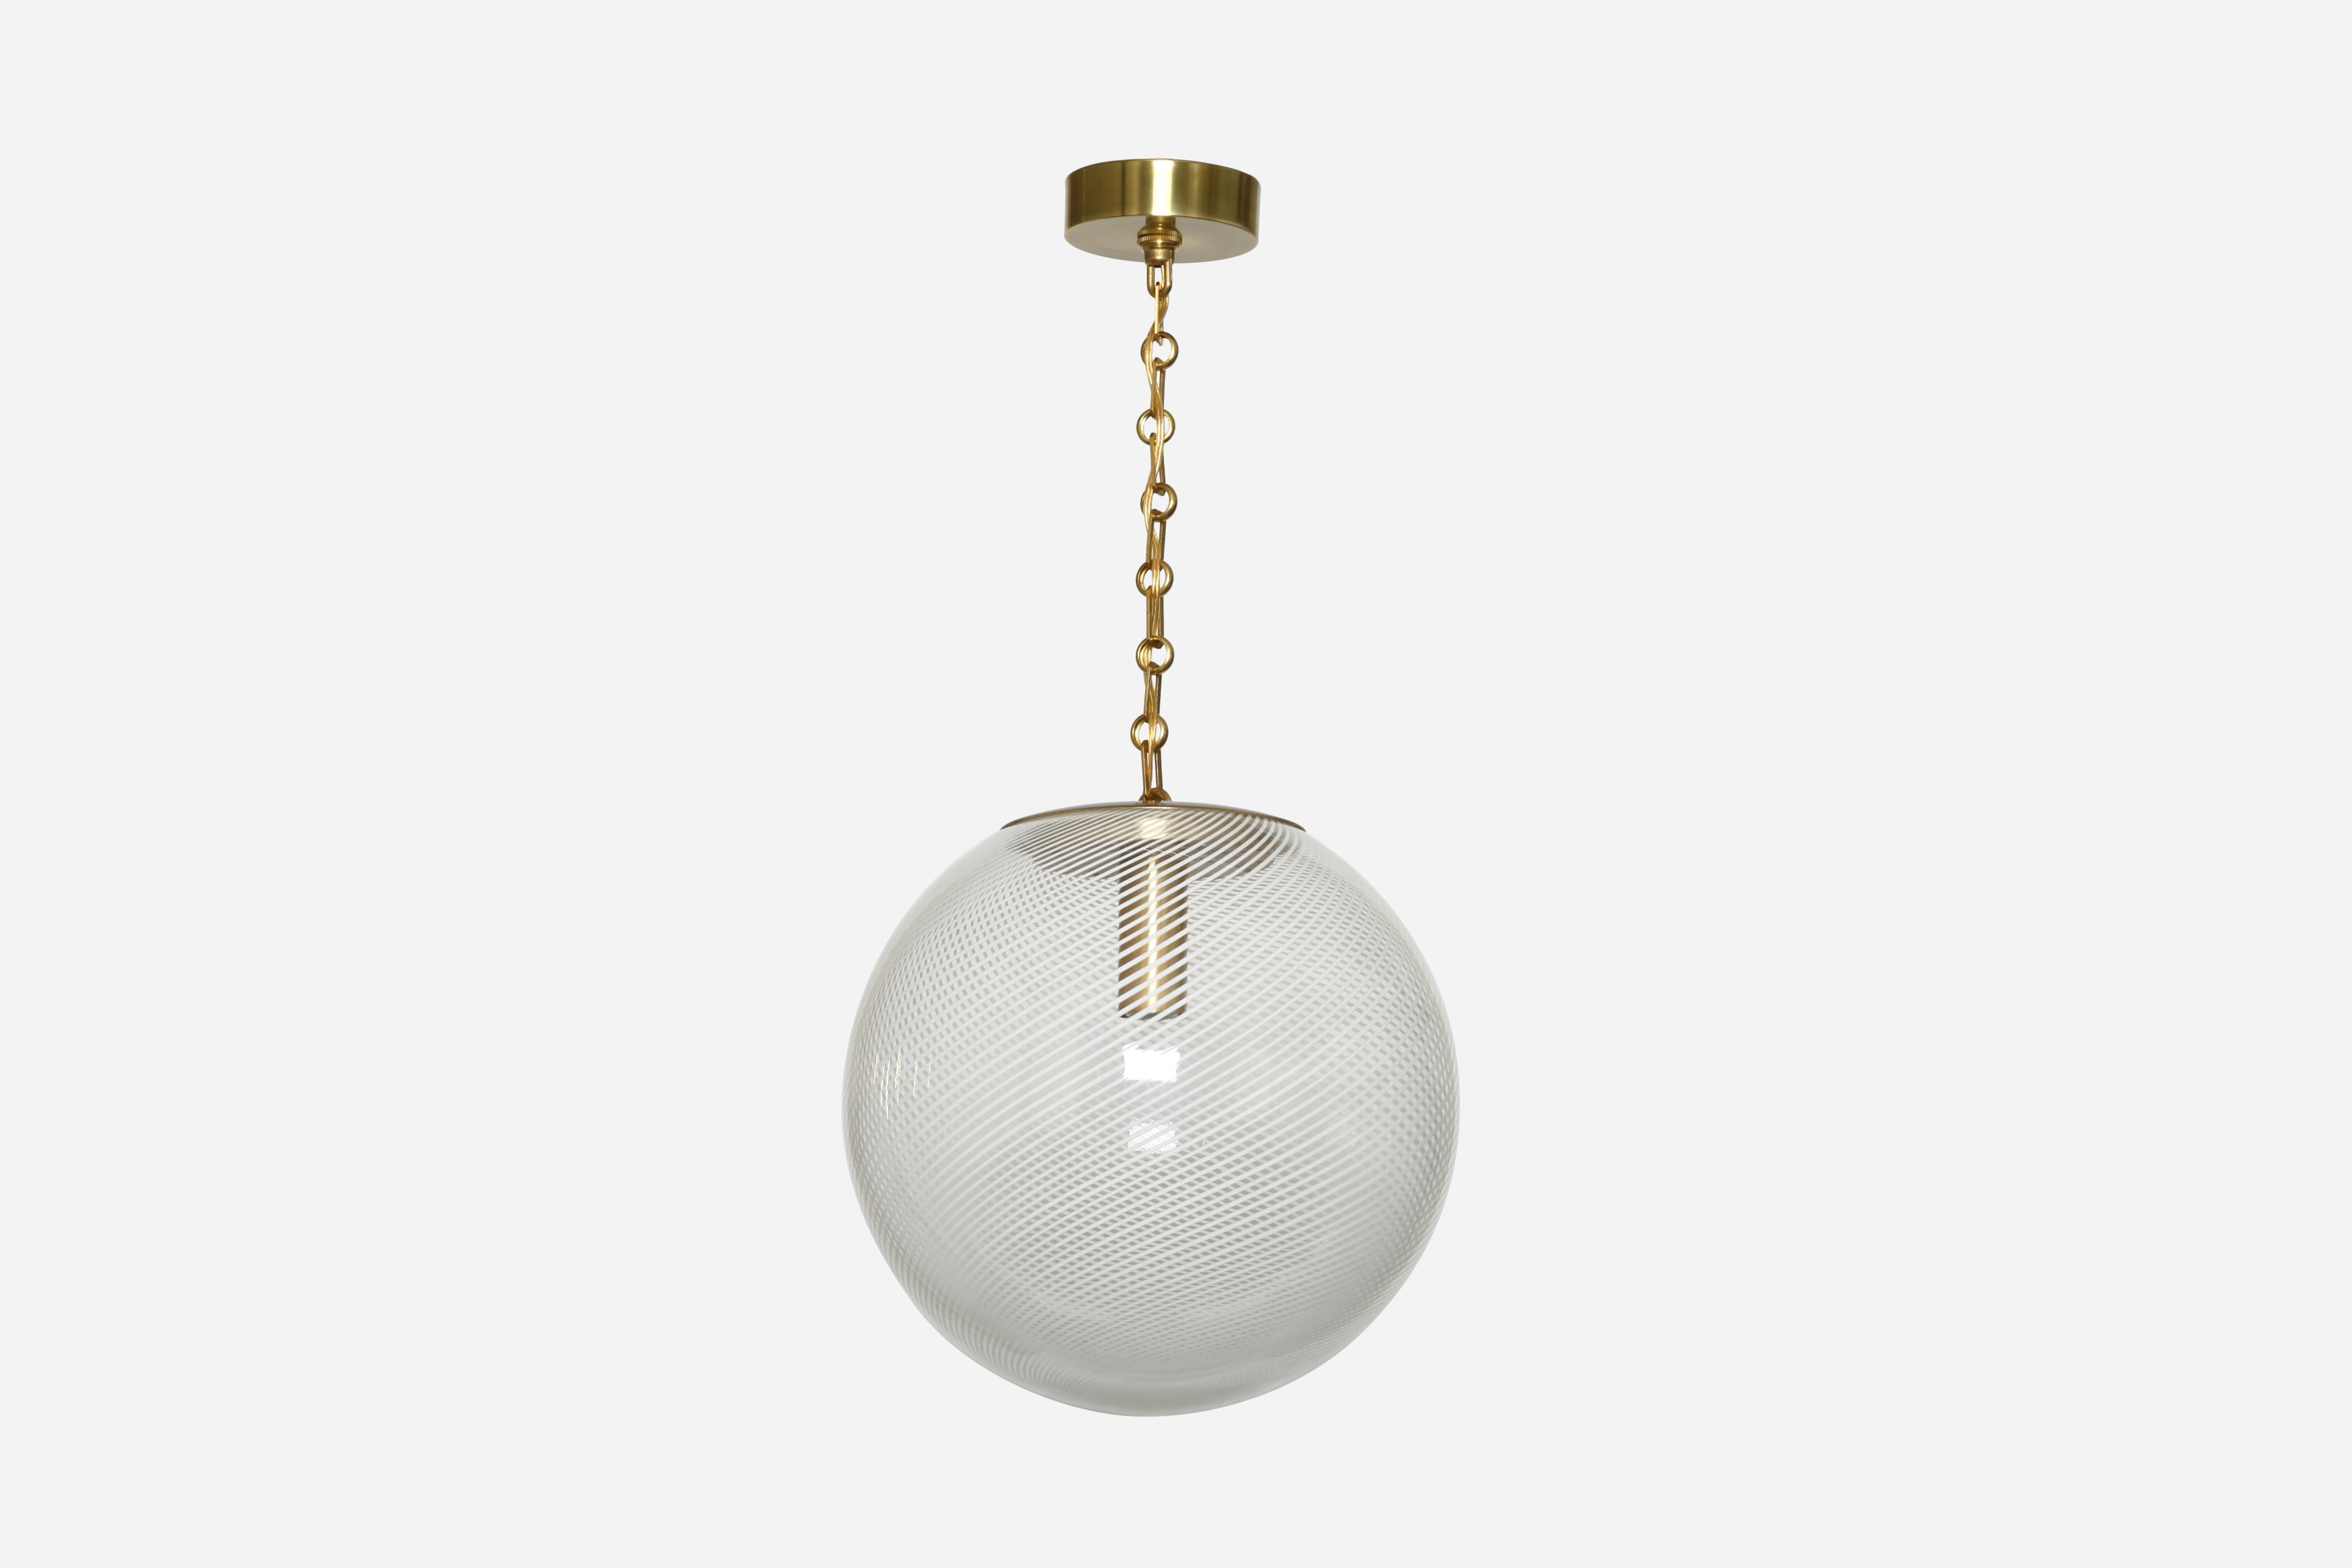 Murano glass ceiling pendant
Italy 1960s
Handblown glass, brass.
Rewired for US.
Overall drop is adjustable.

We take pride in bringing vintage fixtures to their full glory again.
At Illustris Lighting our main focus is to deliver lighting fixtures